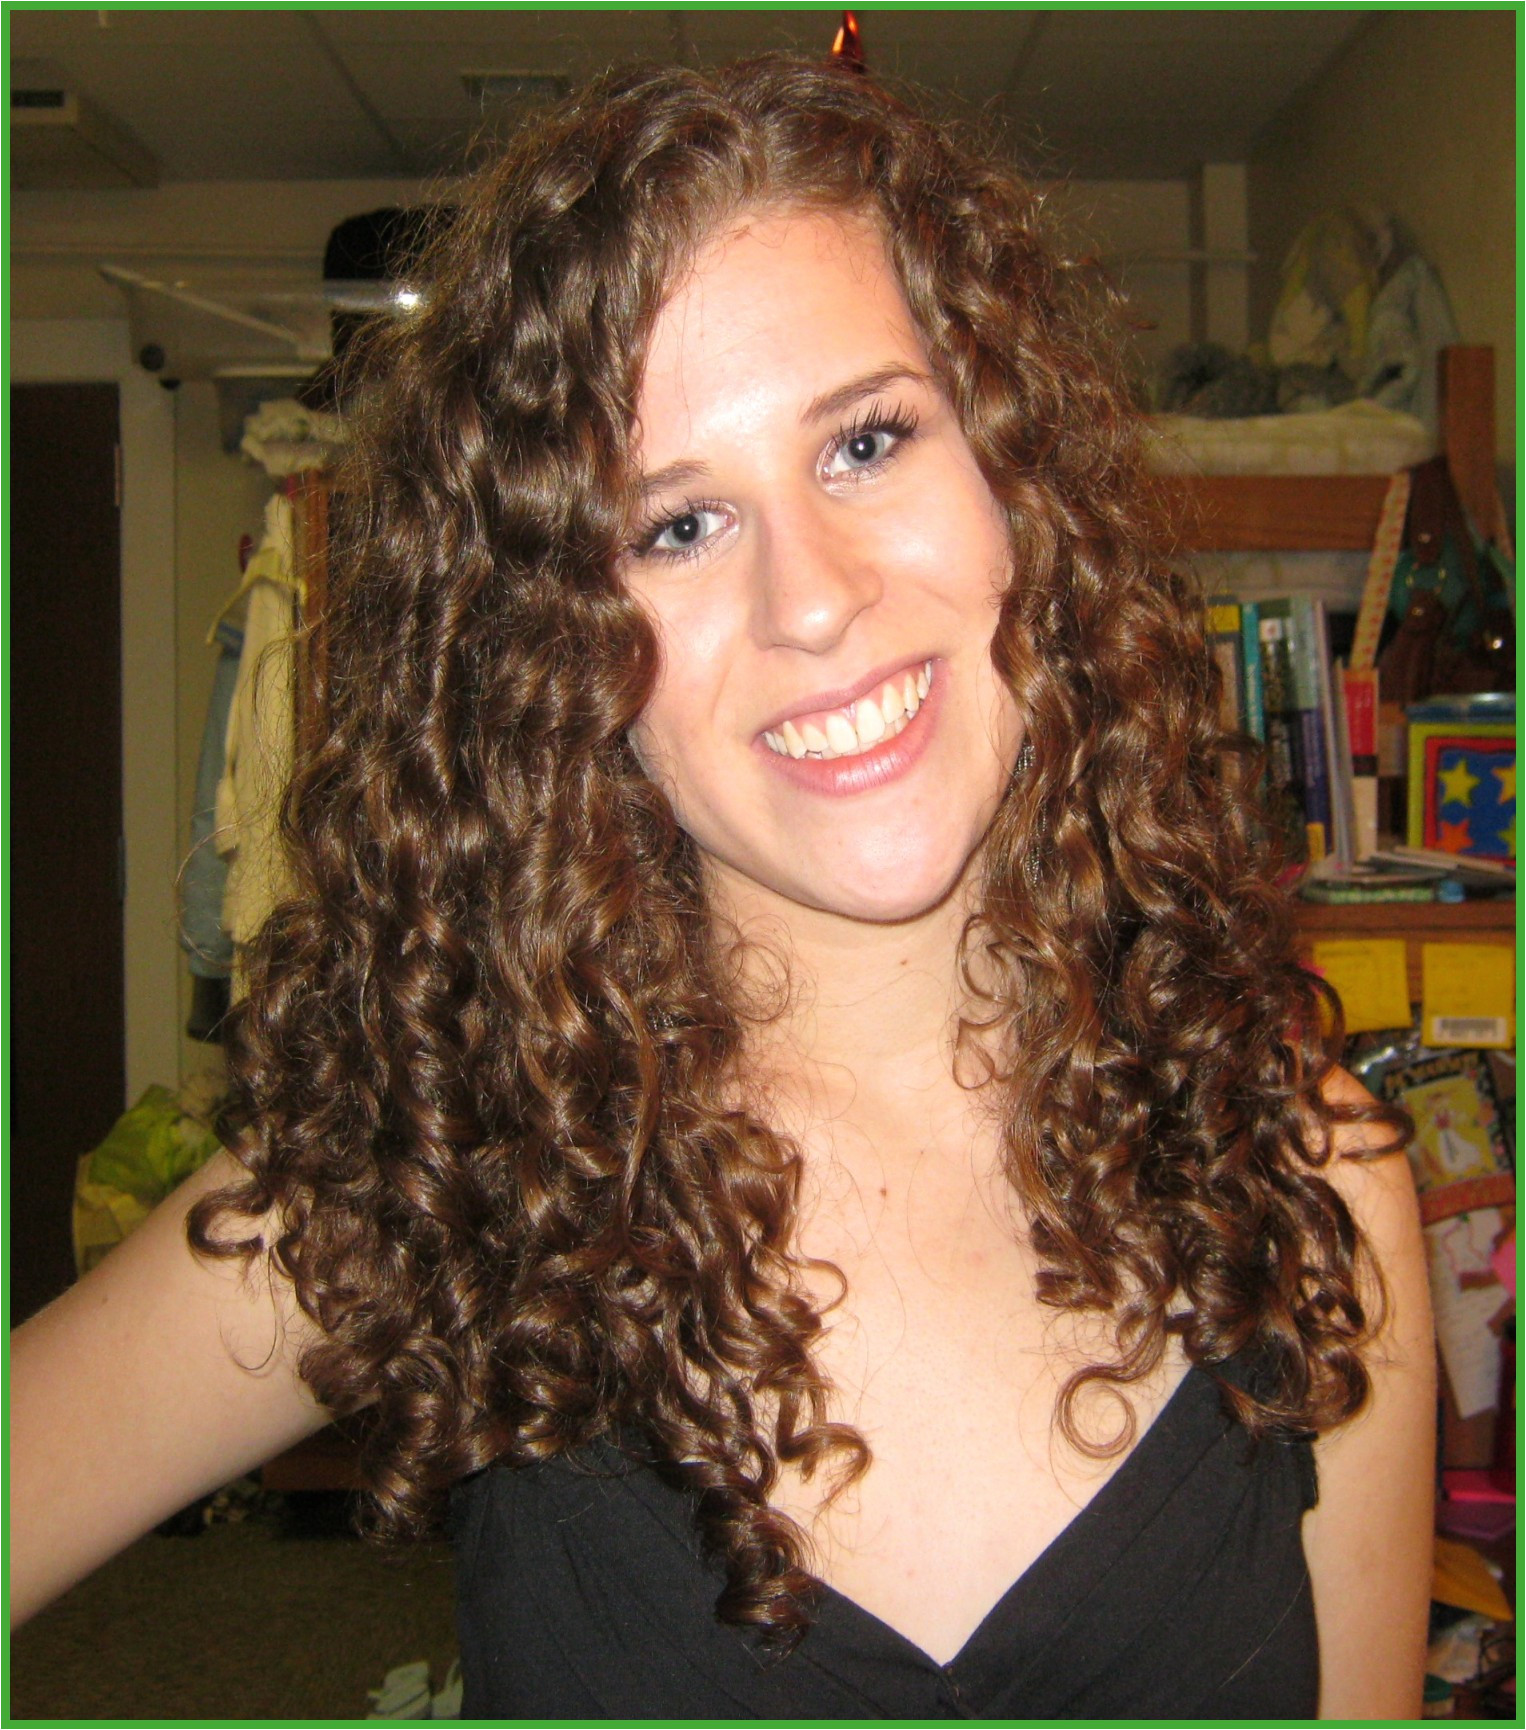 Hairstyle Short Curly Hair Exciting Very Curly Hairstyles Fresh Curly Hair 0d Archives Hair